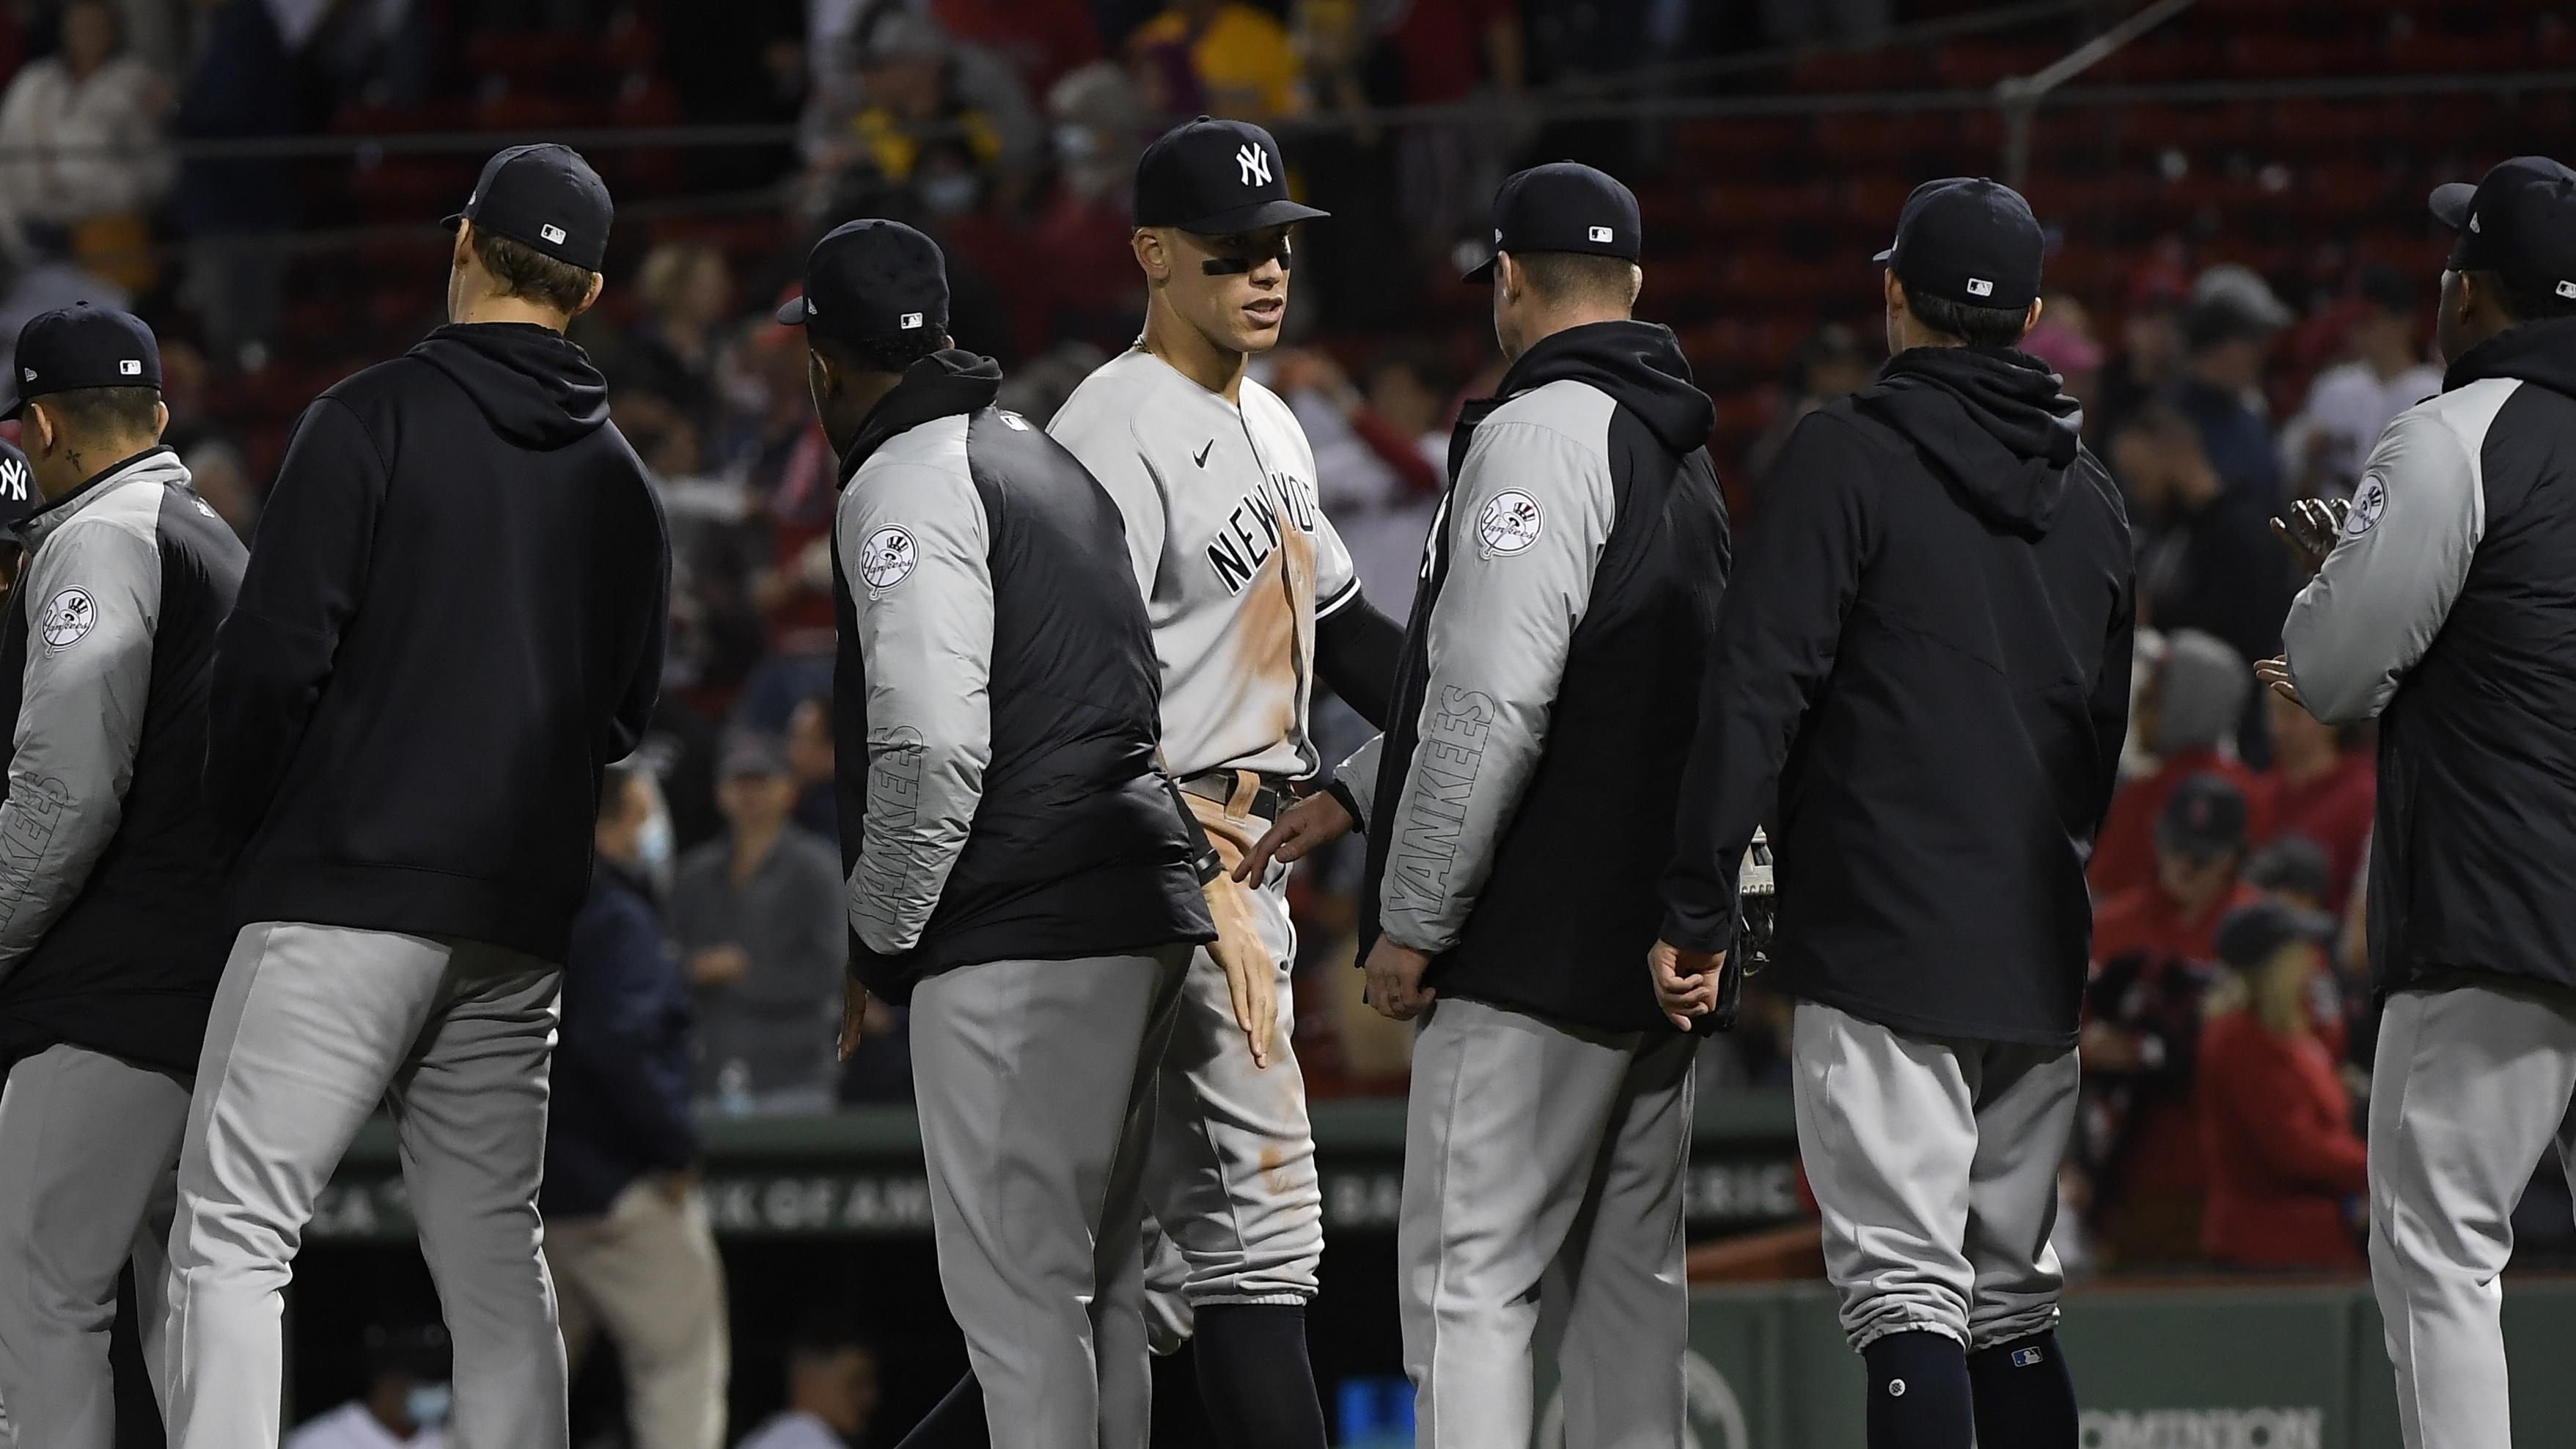 Sep 26, 2021; Boston, Massachusetts, USA; New York Yankees right fielder Aaron Judge (99) and his teammates celebrate after defeating the Boston Red Sox at Fenway Park. Mandatory Credit: Bob DeChiara-USA TODAY Sports / © Bob DeChiara-USA TODAY Sports